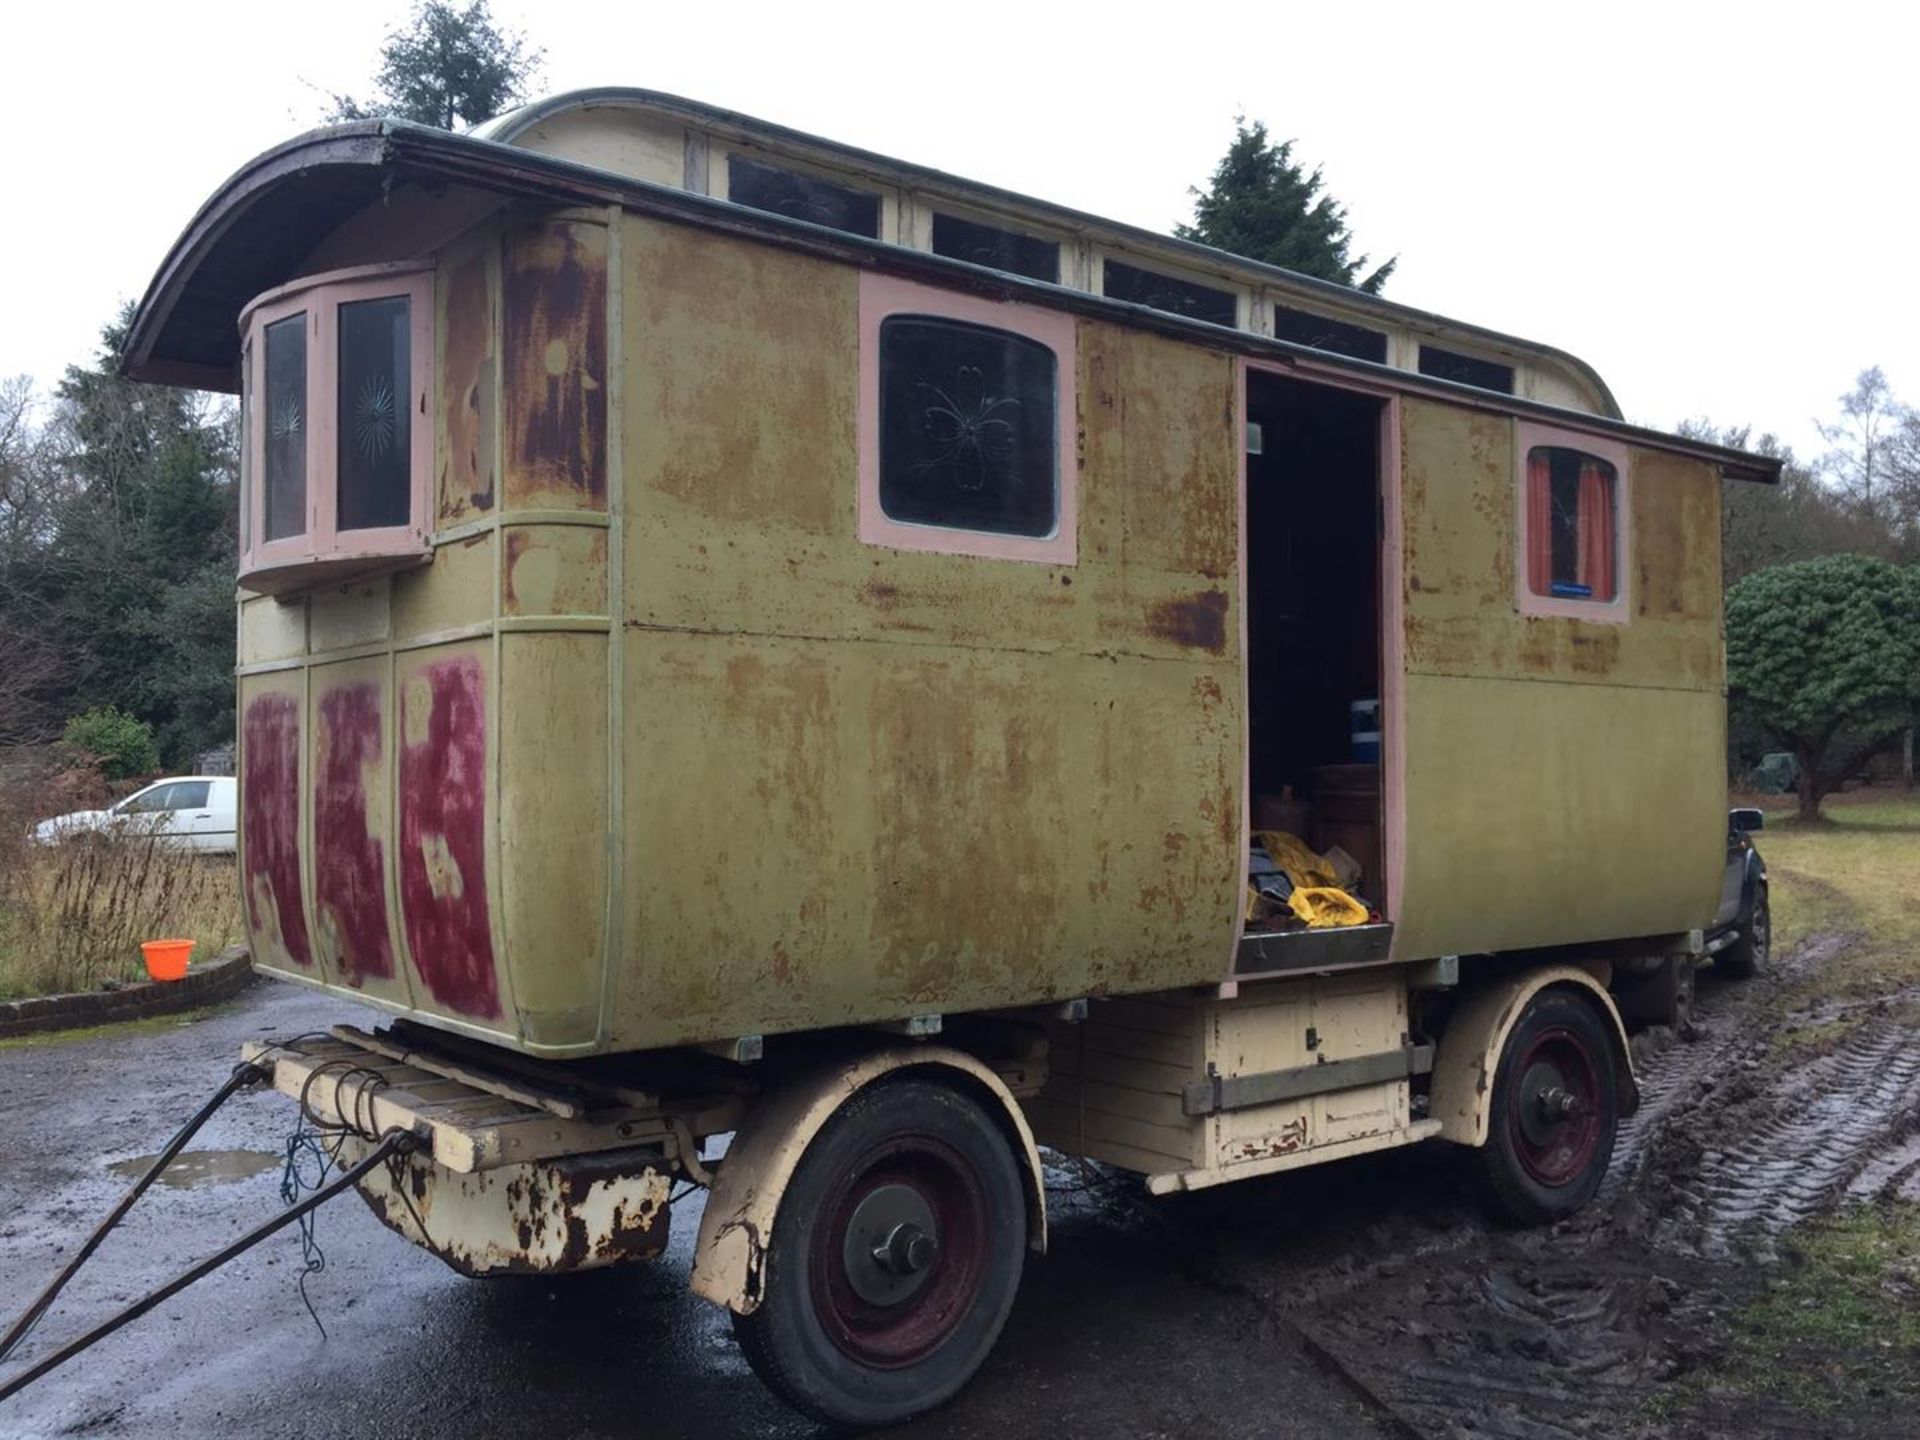 Aluminium clad timber frame living wagon understood to have been built in 1934 by Thomas's of